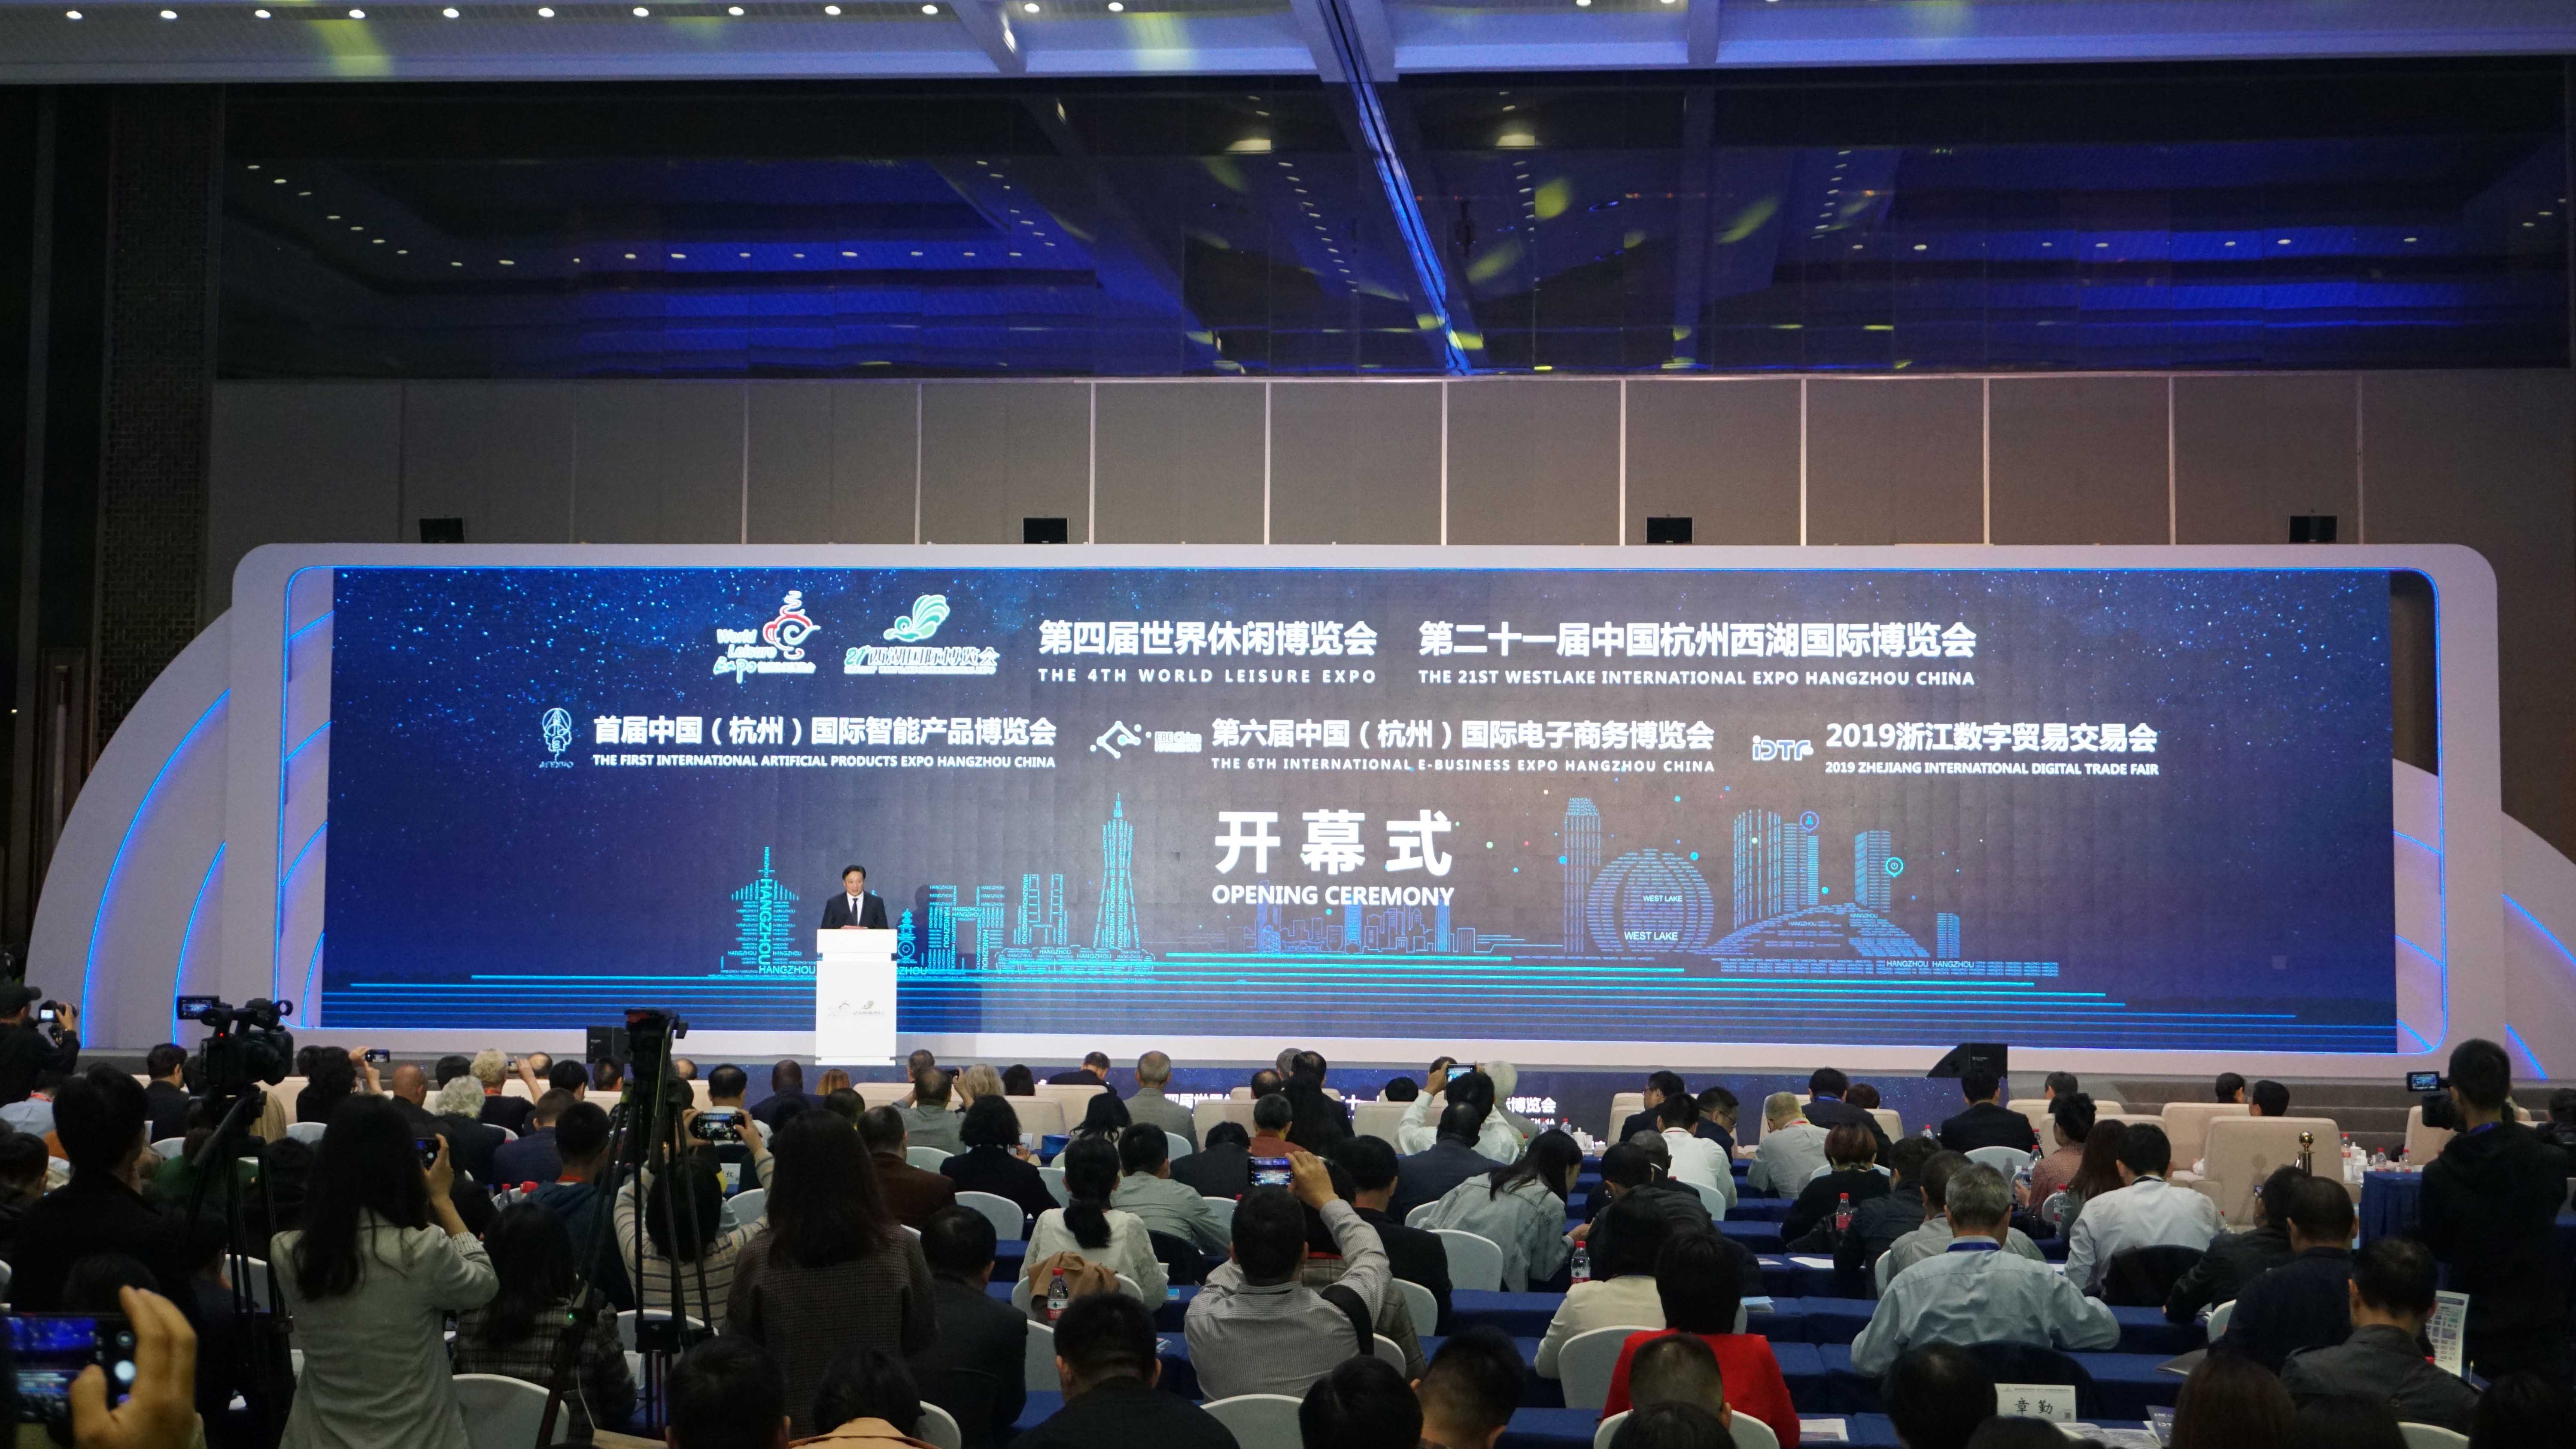 Chengbang Design Group Was Invited To Attend The Opening Ceremony Of The 4th World Leisure Expo